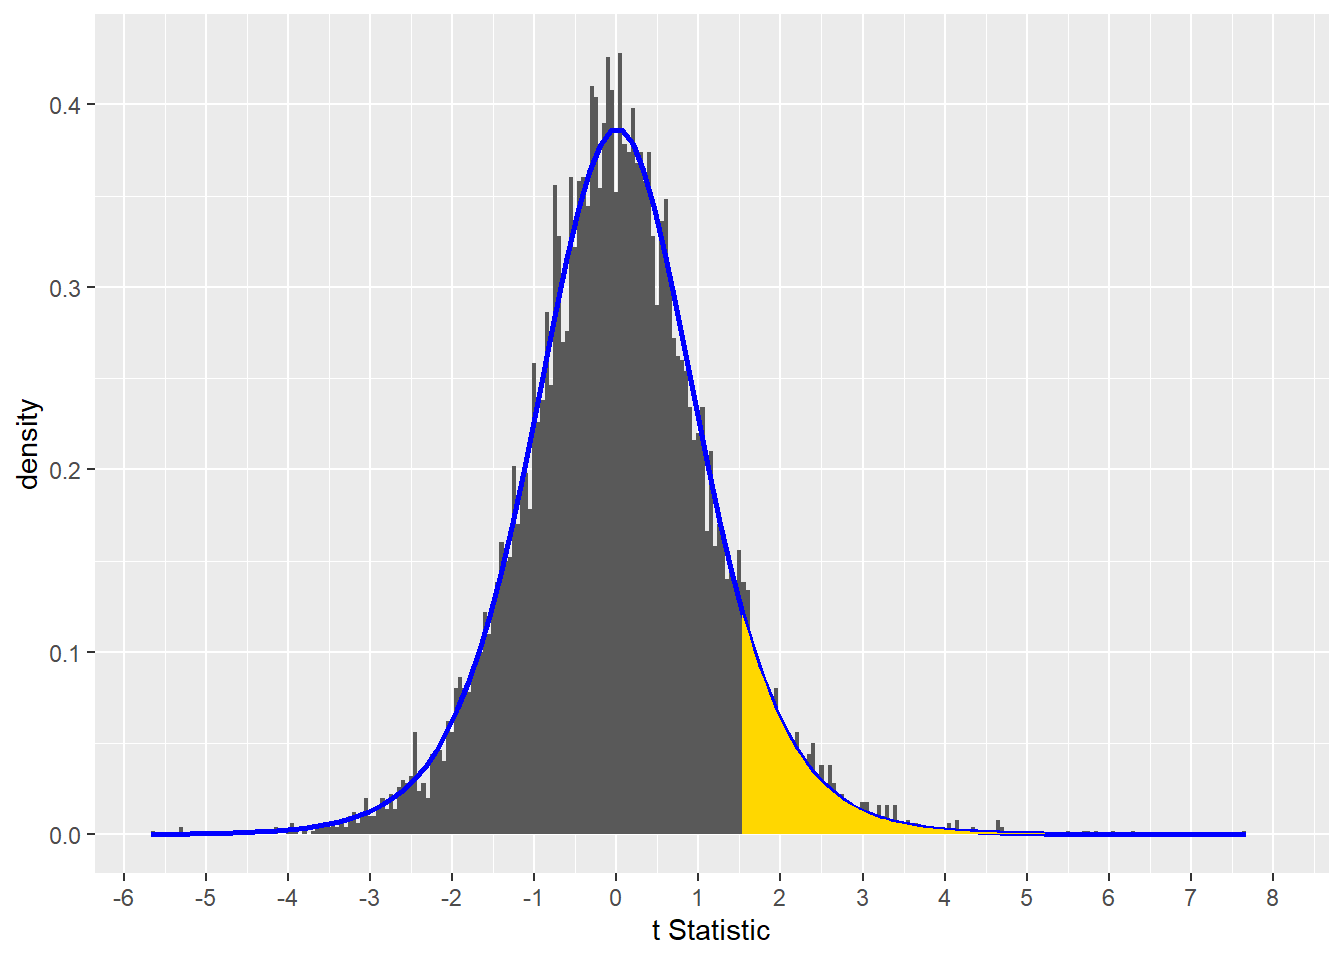 The p-value for t = 1.536499 is the gold shaded area under the curve.